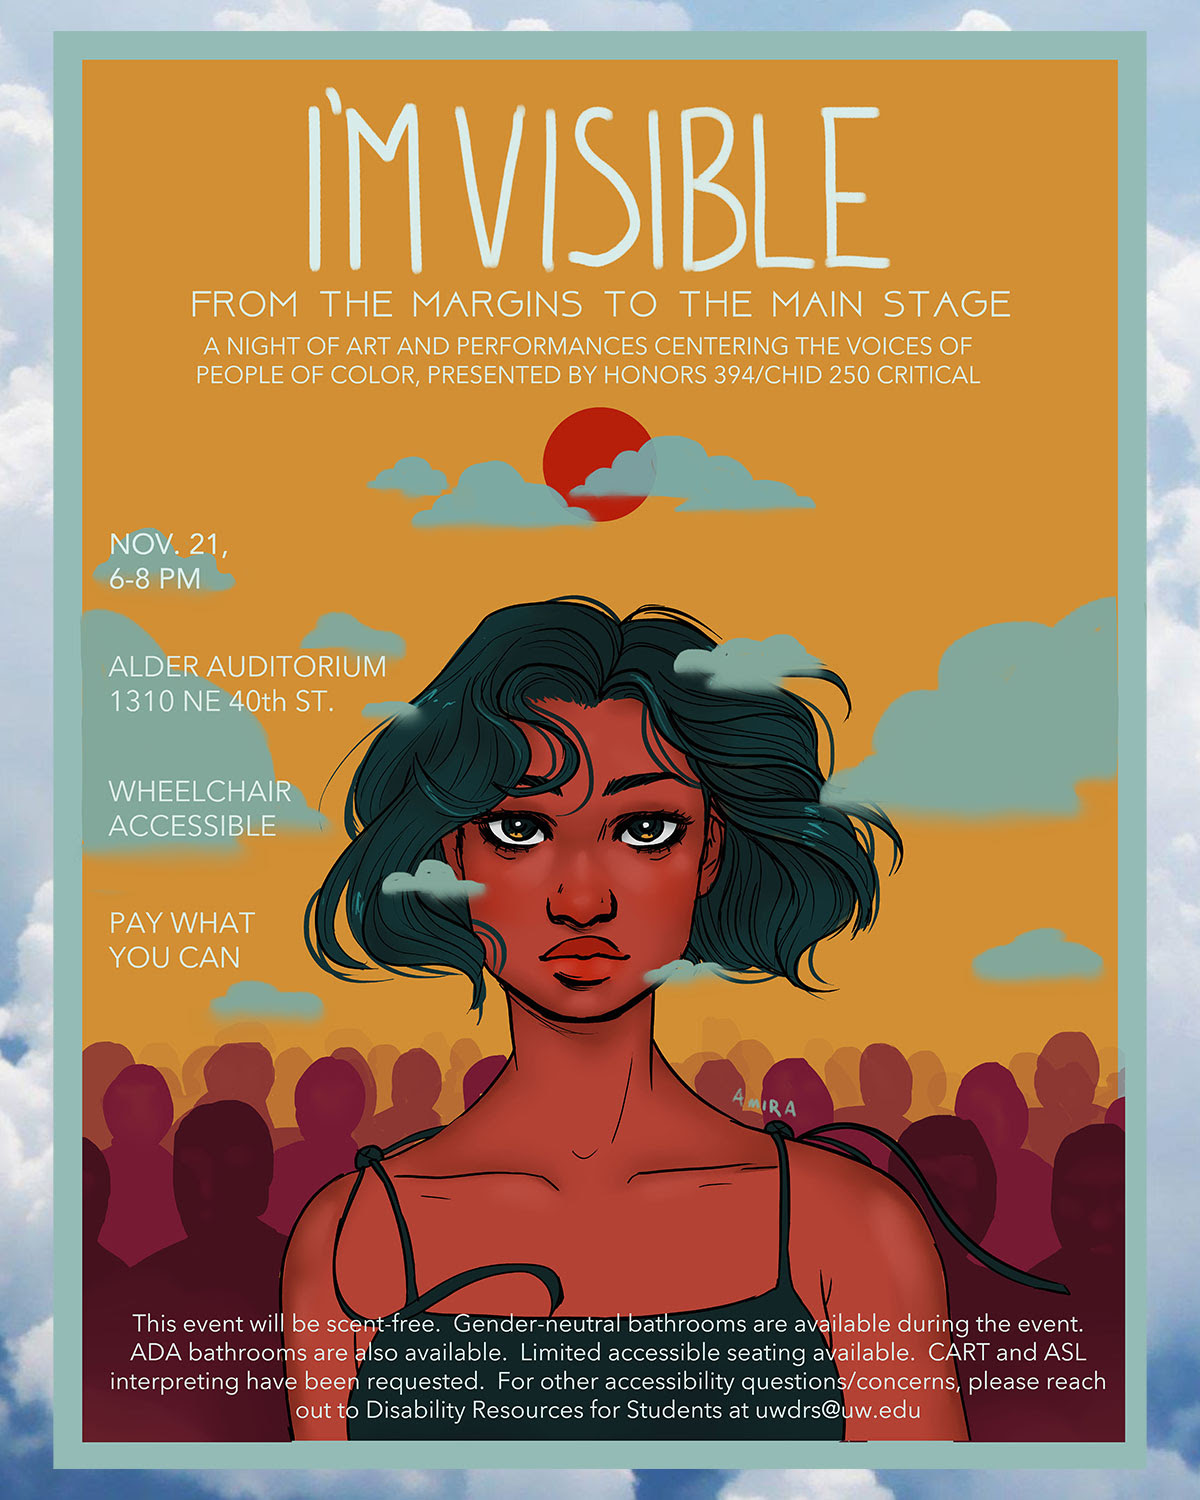 imvisible-poster-1.jpg